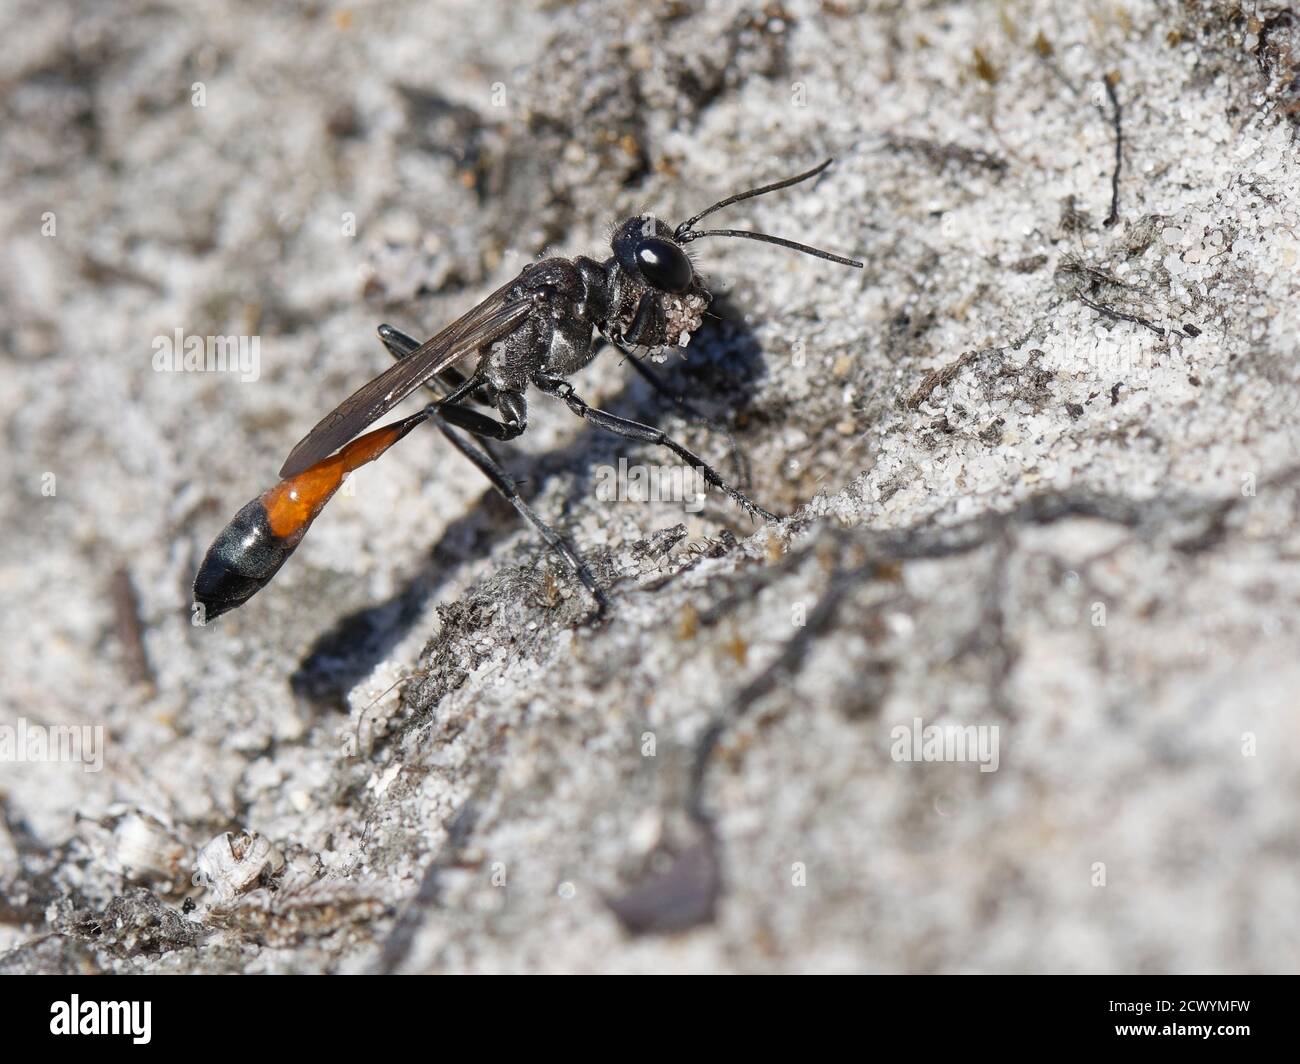 Heath sand wasp (Ammophila pubescens) excavating a nest burrow in heathland, carrying a ball of sand between its mandibles and front legs, Dorset, UK. Stock Photo